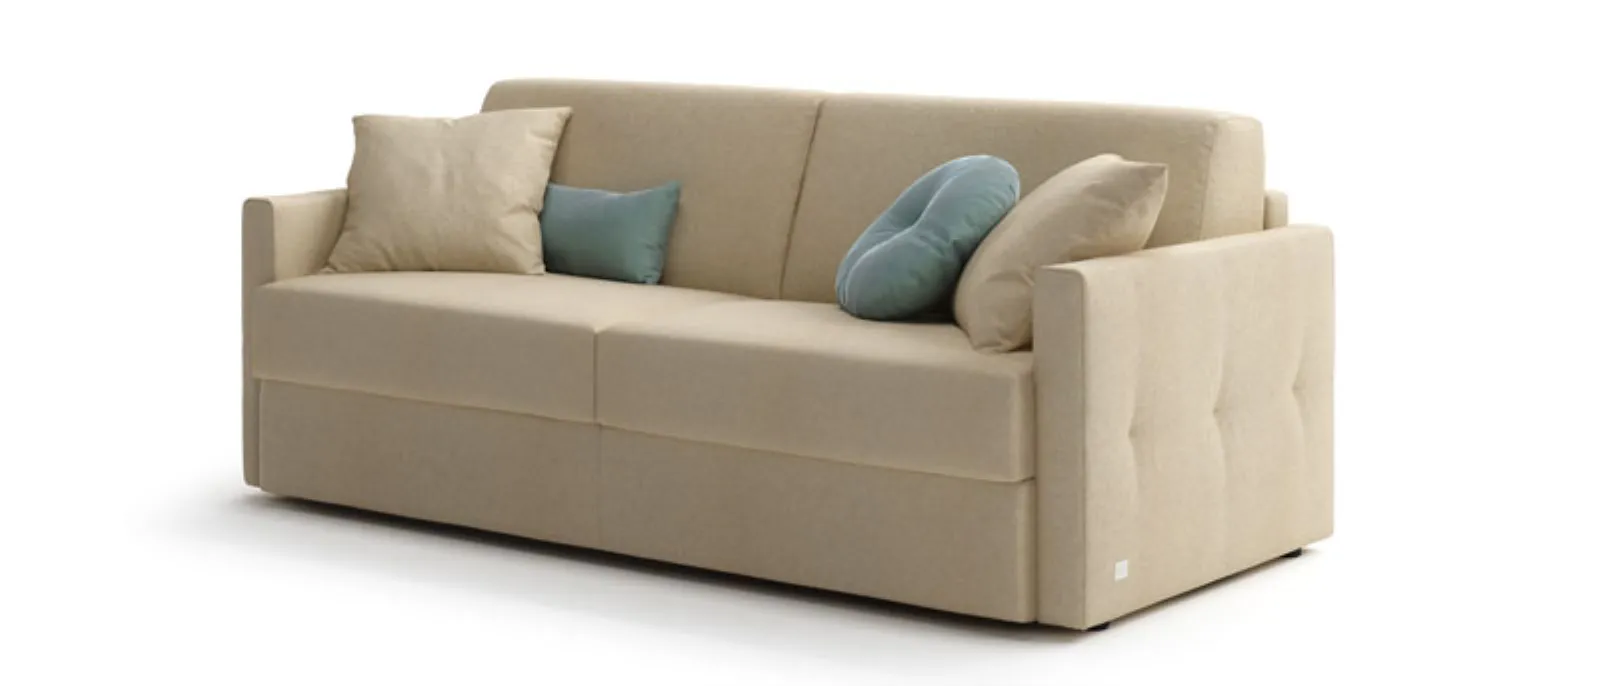 sofa bed with high mattress